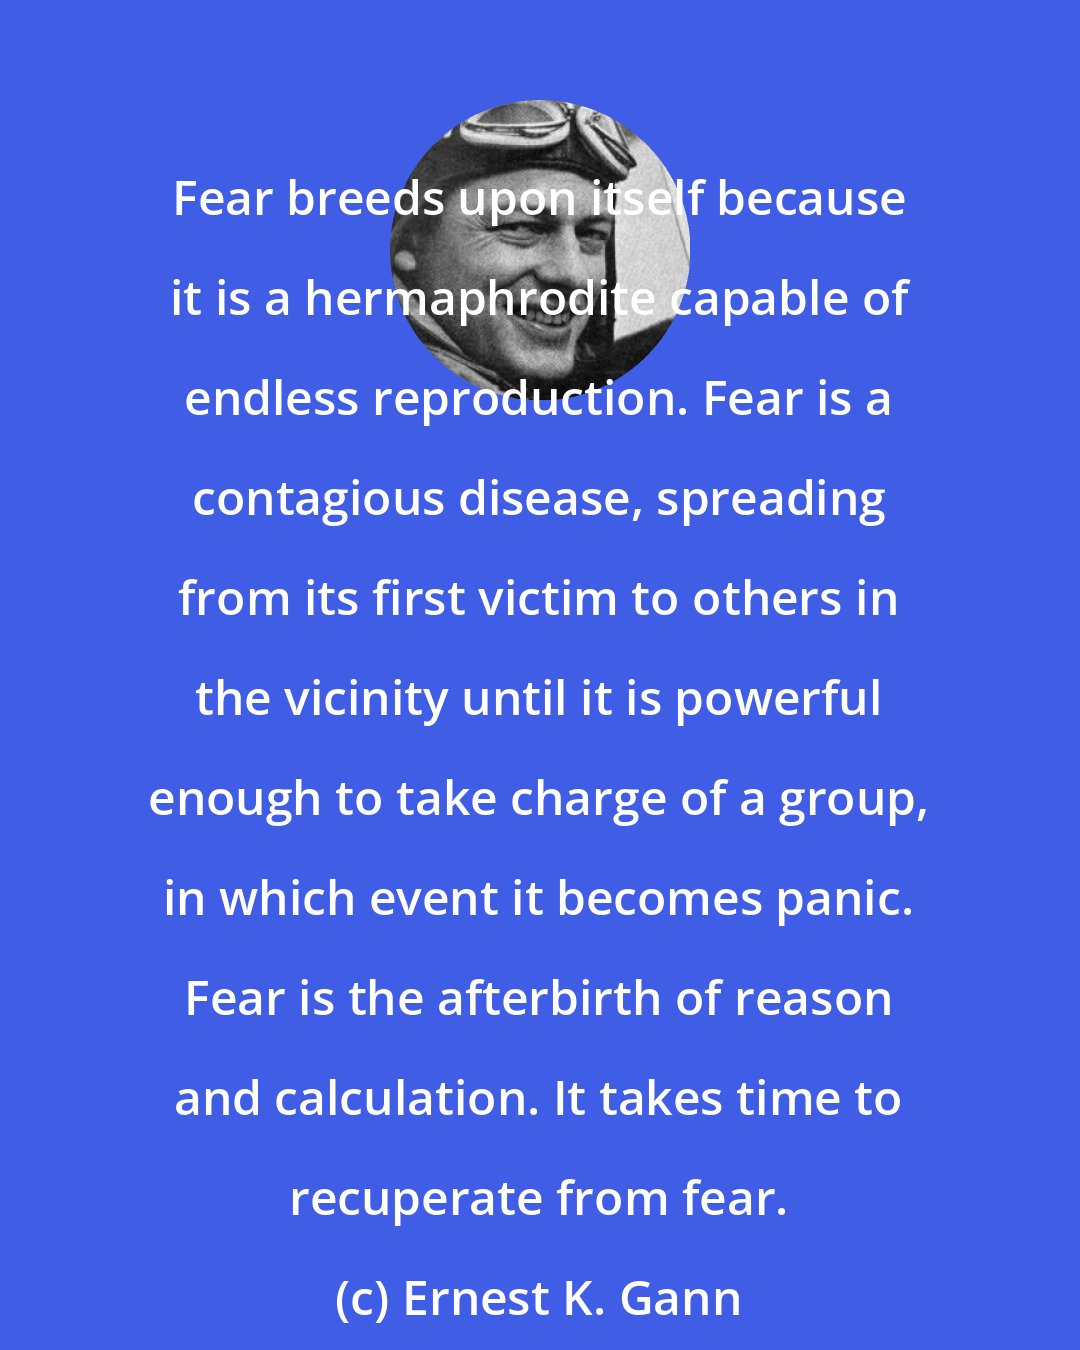 Ernest K. Gann: Fear breeds upon itself because it is a hermaphrodite capable of endless reproduction. Fear is a contagious disease, spreading from its first victim to others in the vicinity until it is powerful enough to take charge of a group, in which event it becomes panic. Fear is the afterbirth of reason and calculation. It takes time to recuperate from fear.